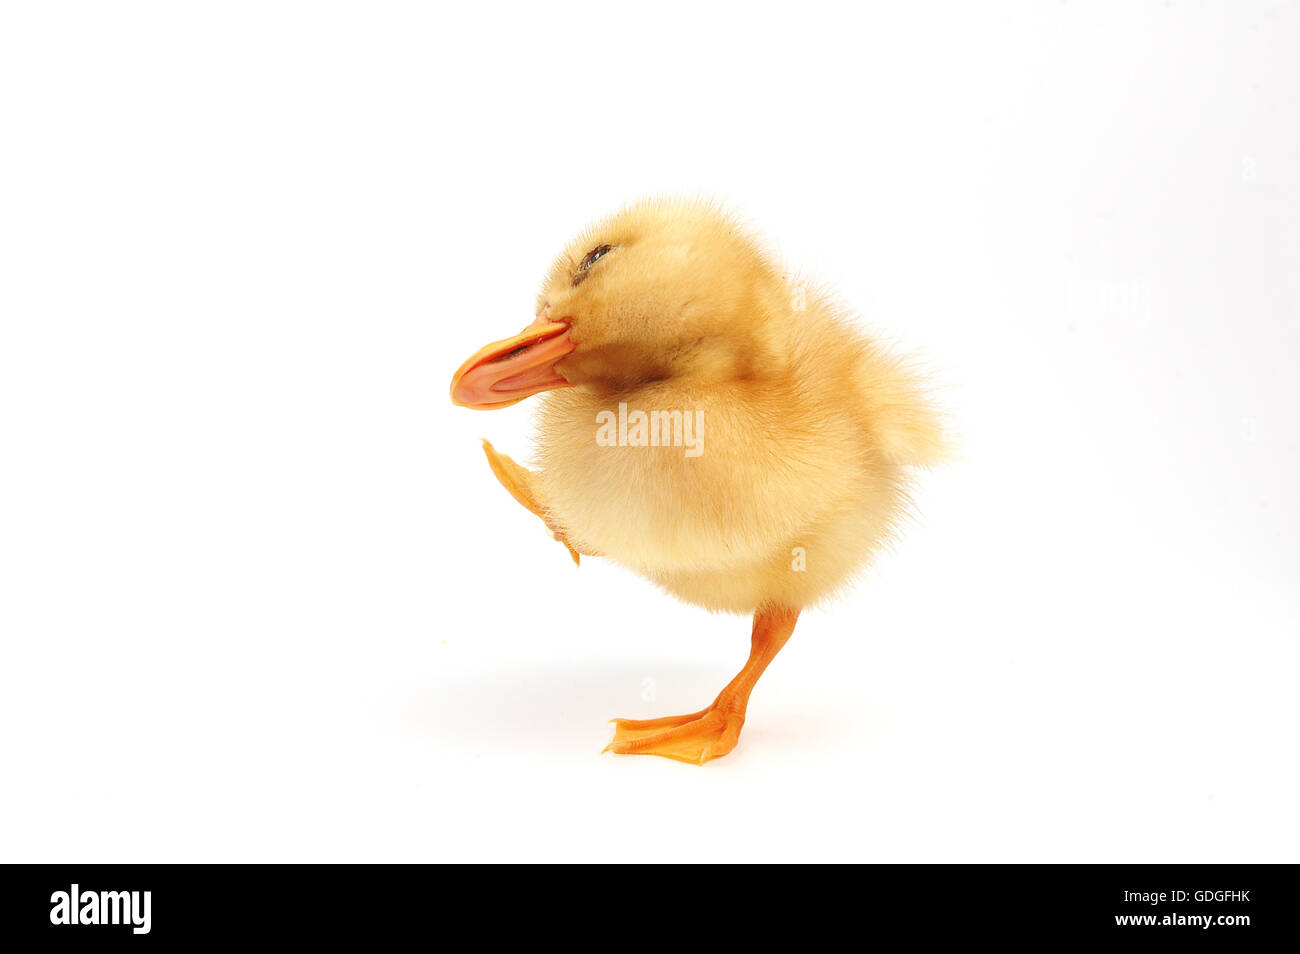 cute yellow baby duck,isolated on white background Stock Photo